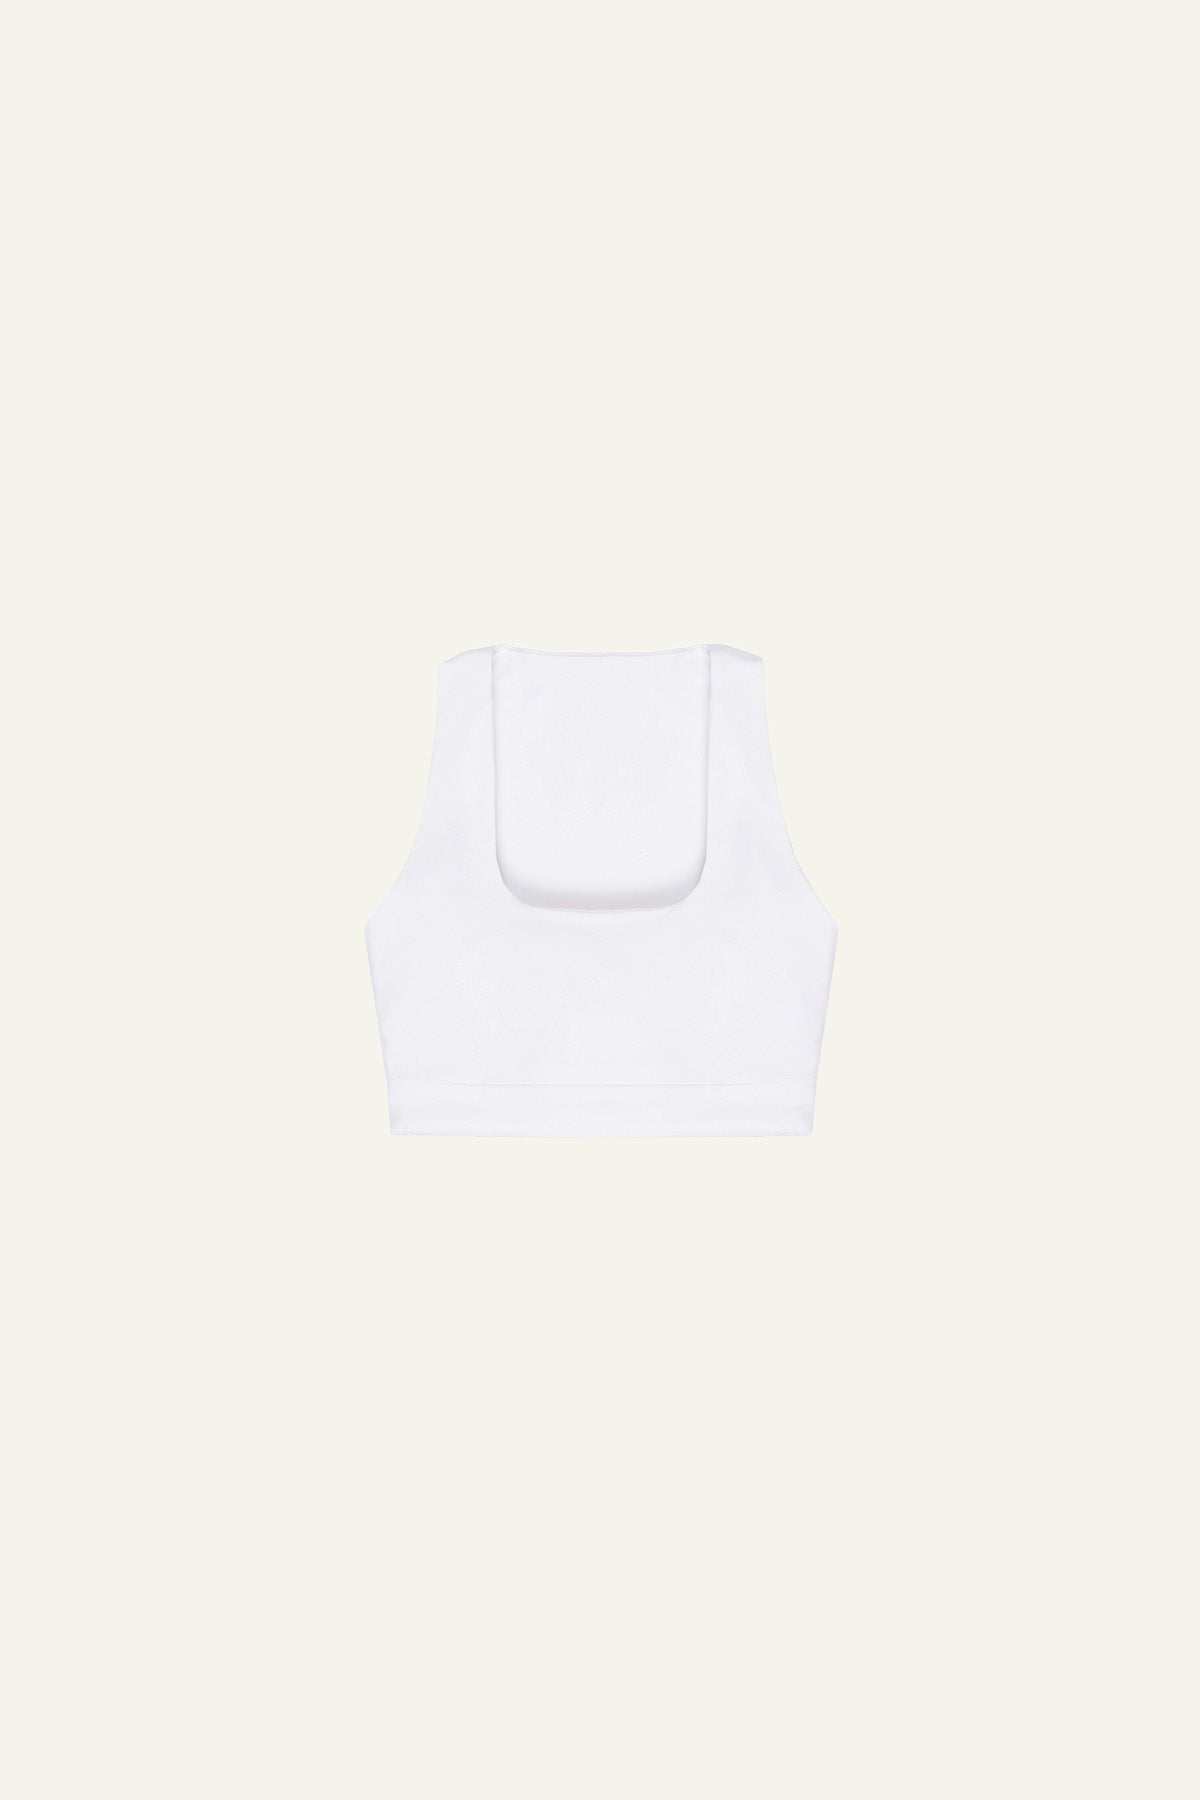  Experience ultimate luxury top with Marta – a Spanish-made, square-neck, crop top, ideal for high-intensity workouts or chic athleisure style. Our advanced sustainable technology offers a cool, breathable, and moisture-wicking design, coupled with UPF50+ sun protection and antibacterial features. 